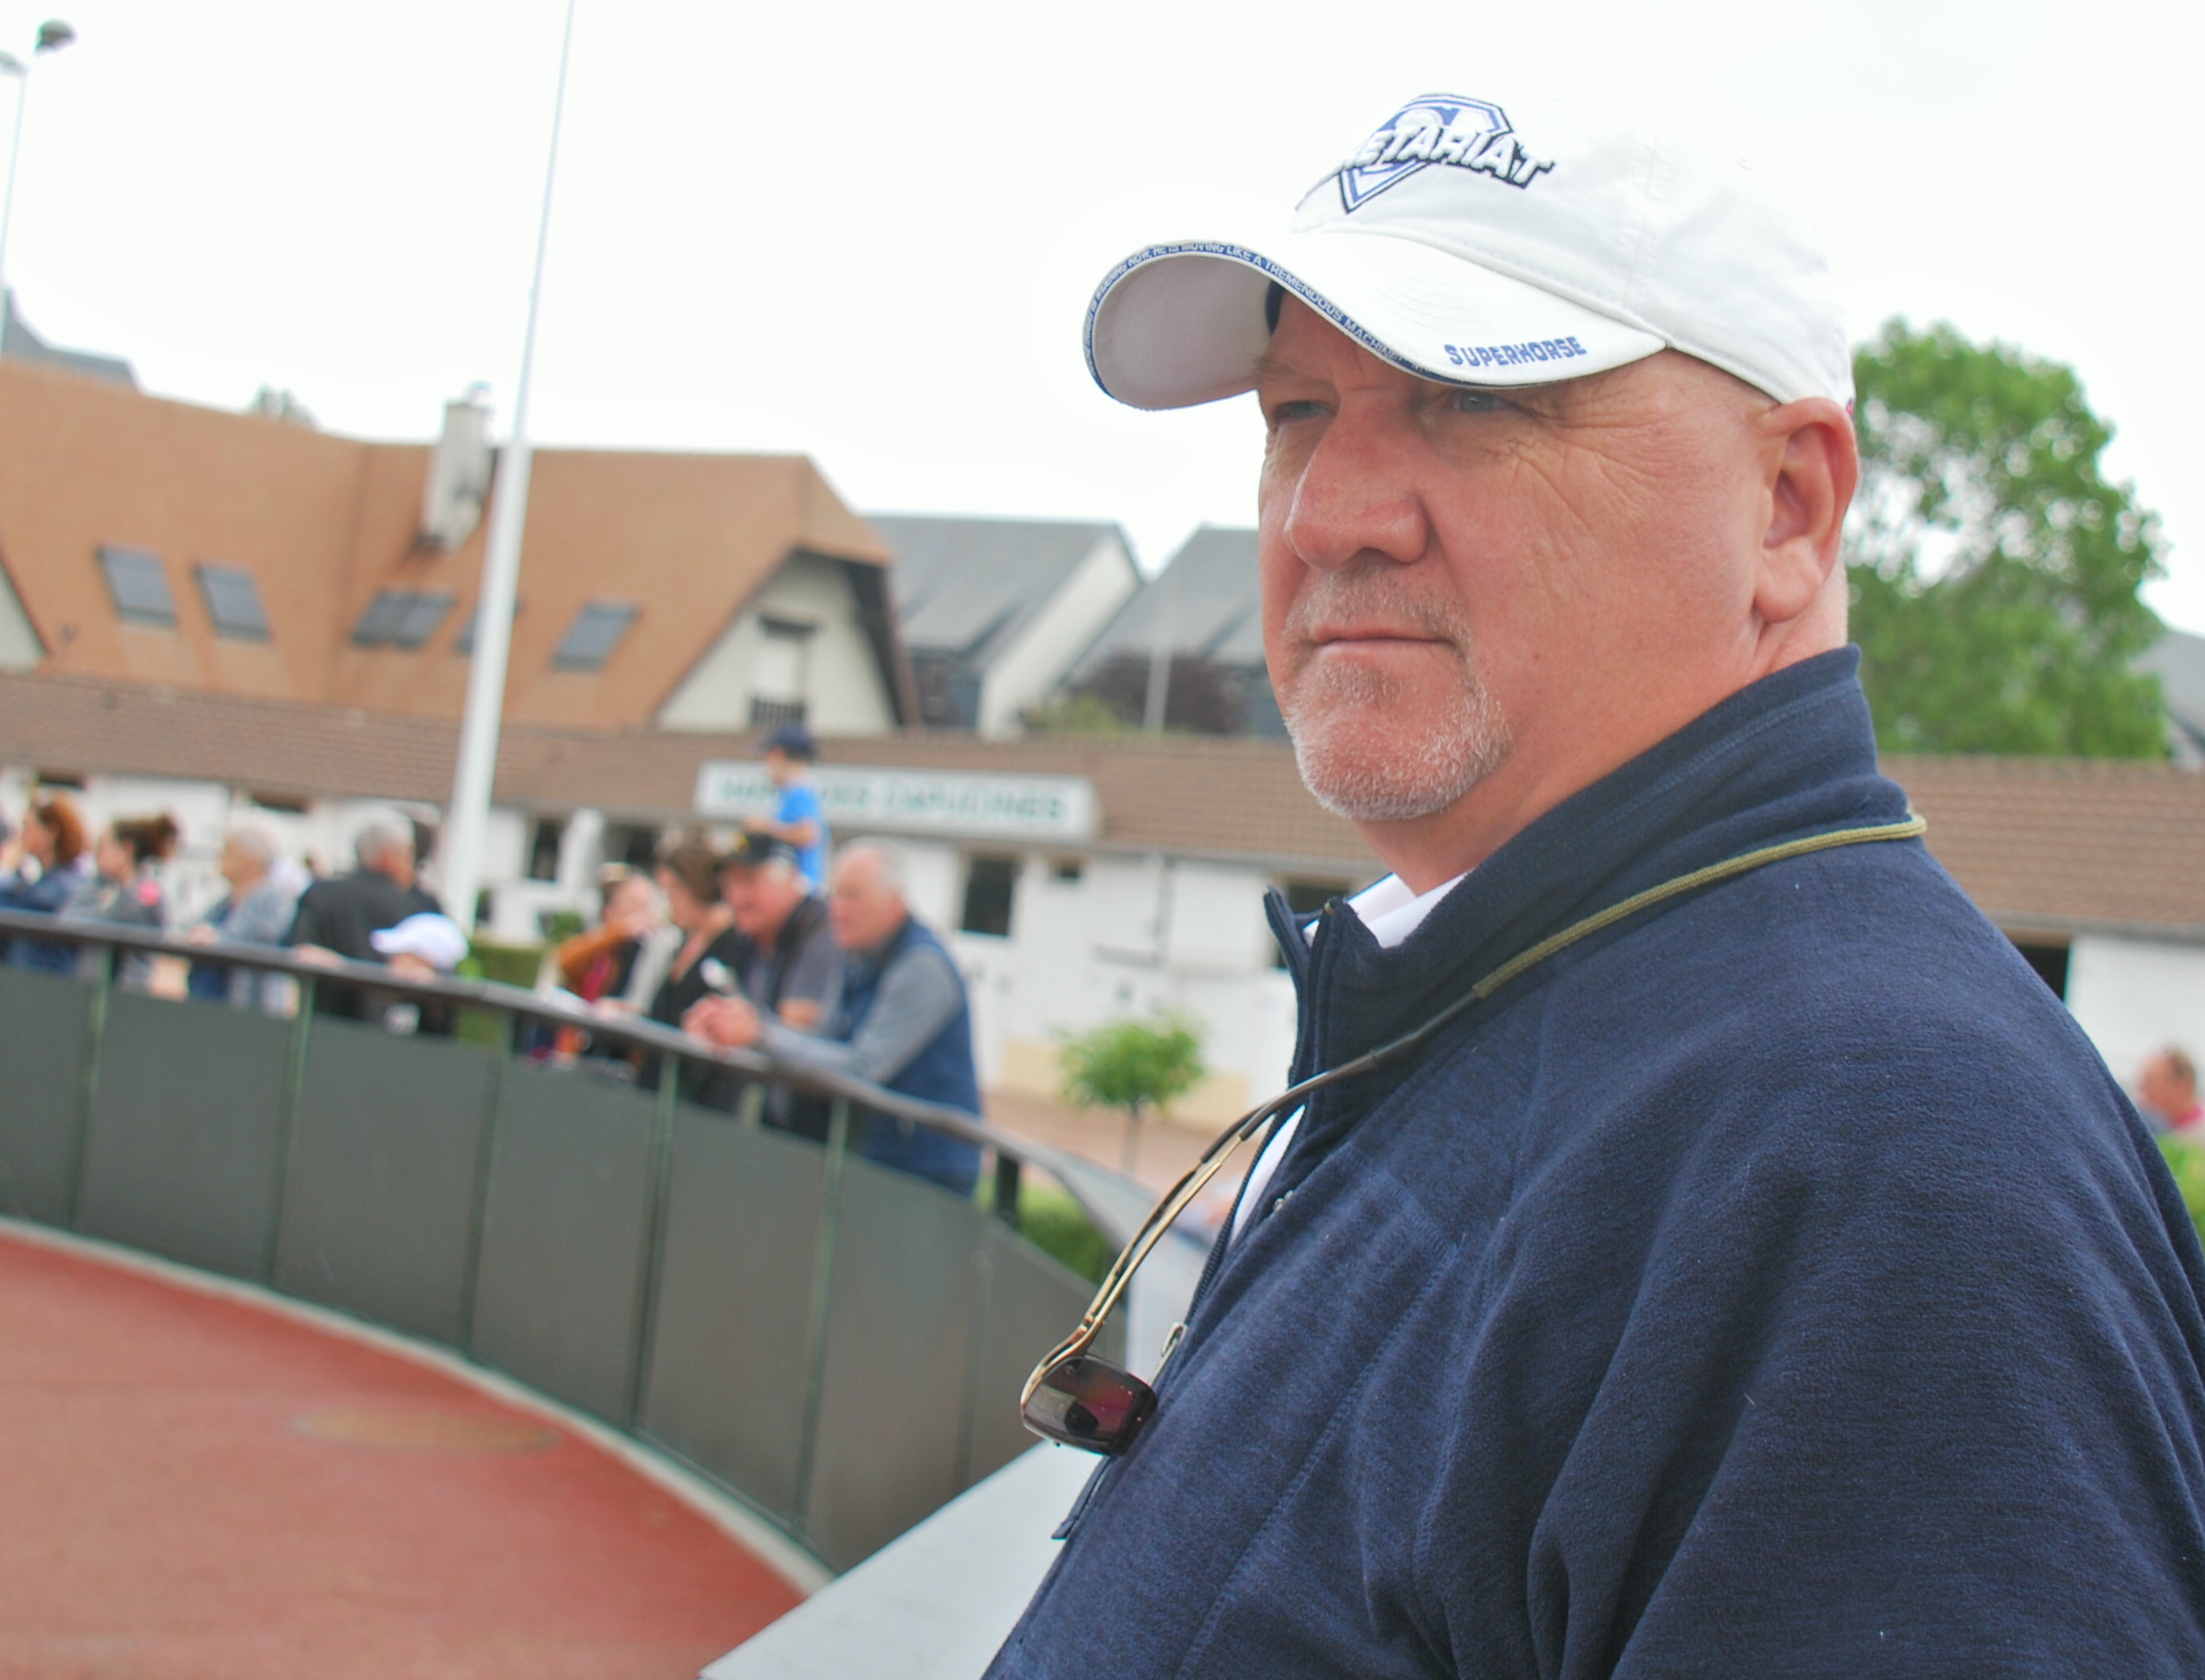 Kenny McPeek at Deauville: “I was looking for fillies with good pedigrees to race first and keep as broodmares.” Photo: John Gilmore